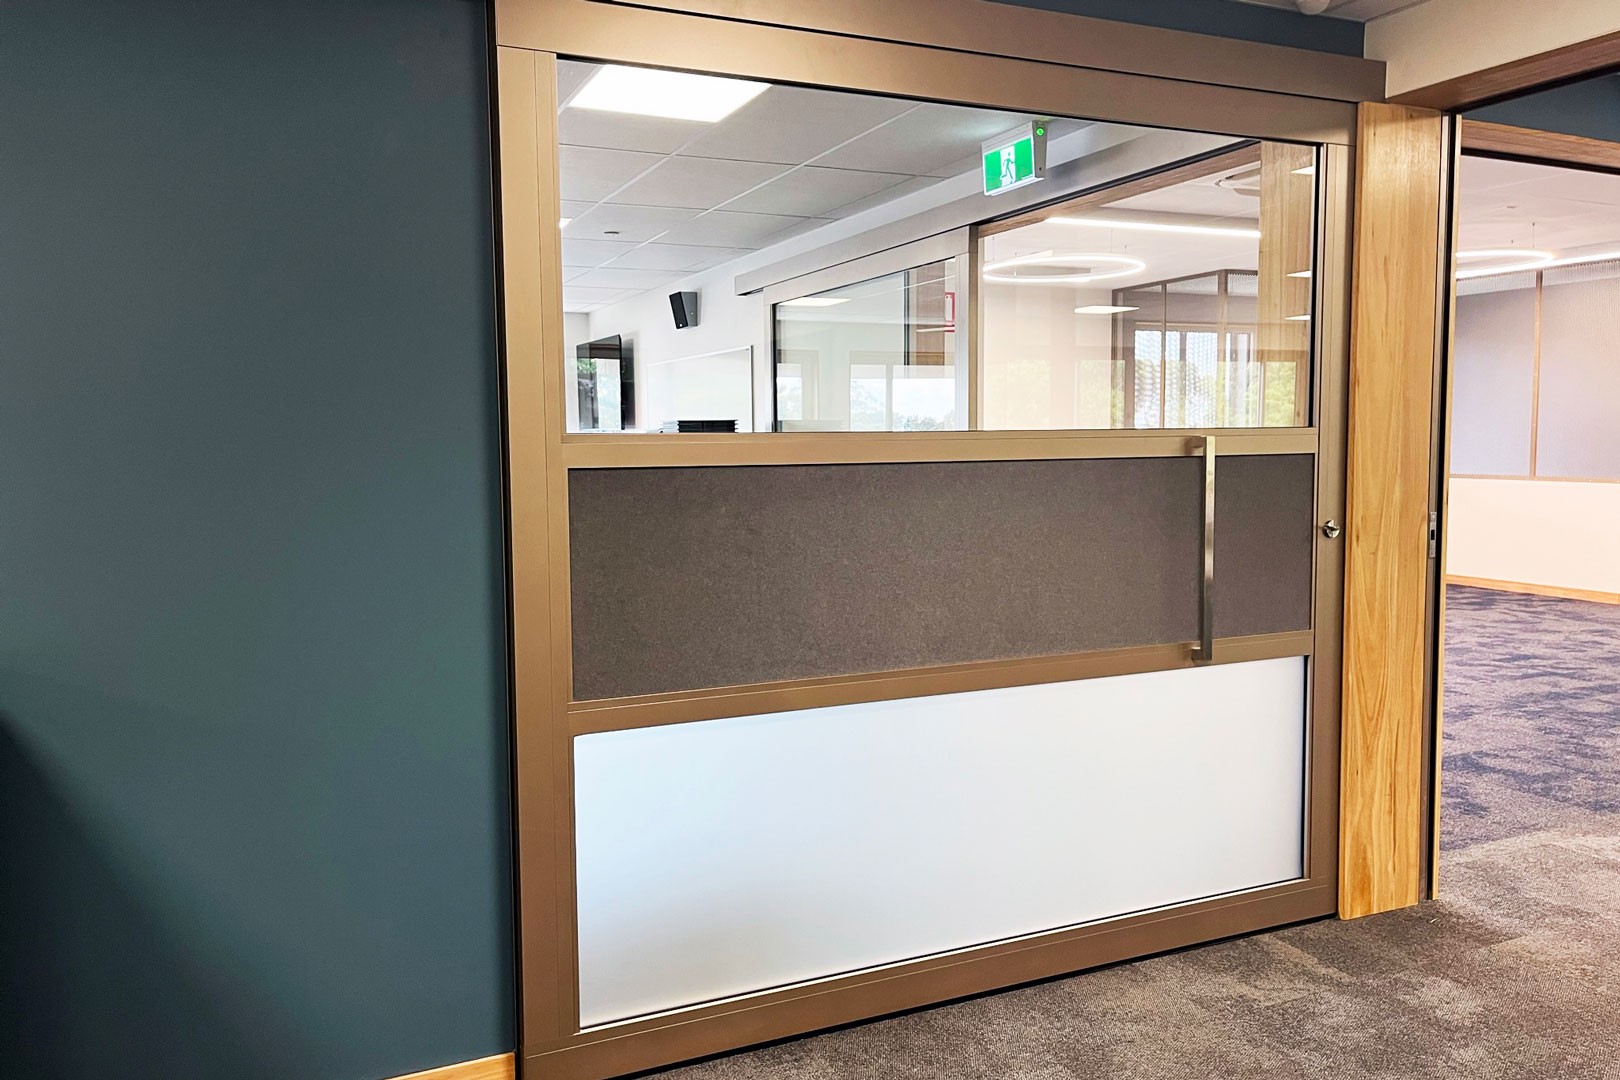 Acoustic sliding doors with recessed receiving jambs in the classroom